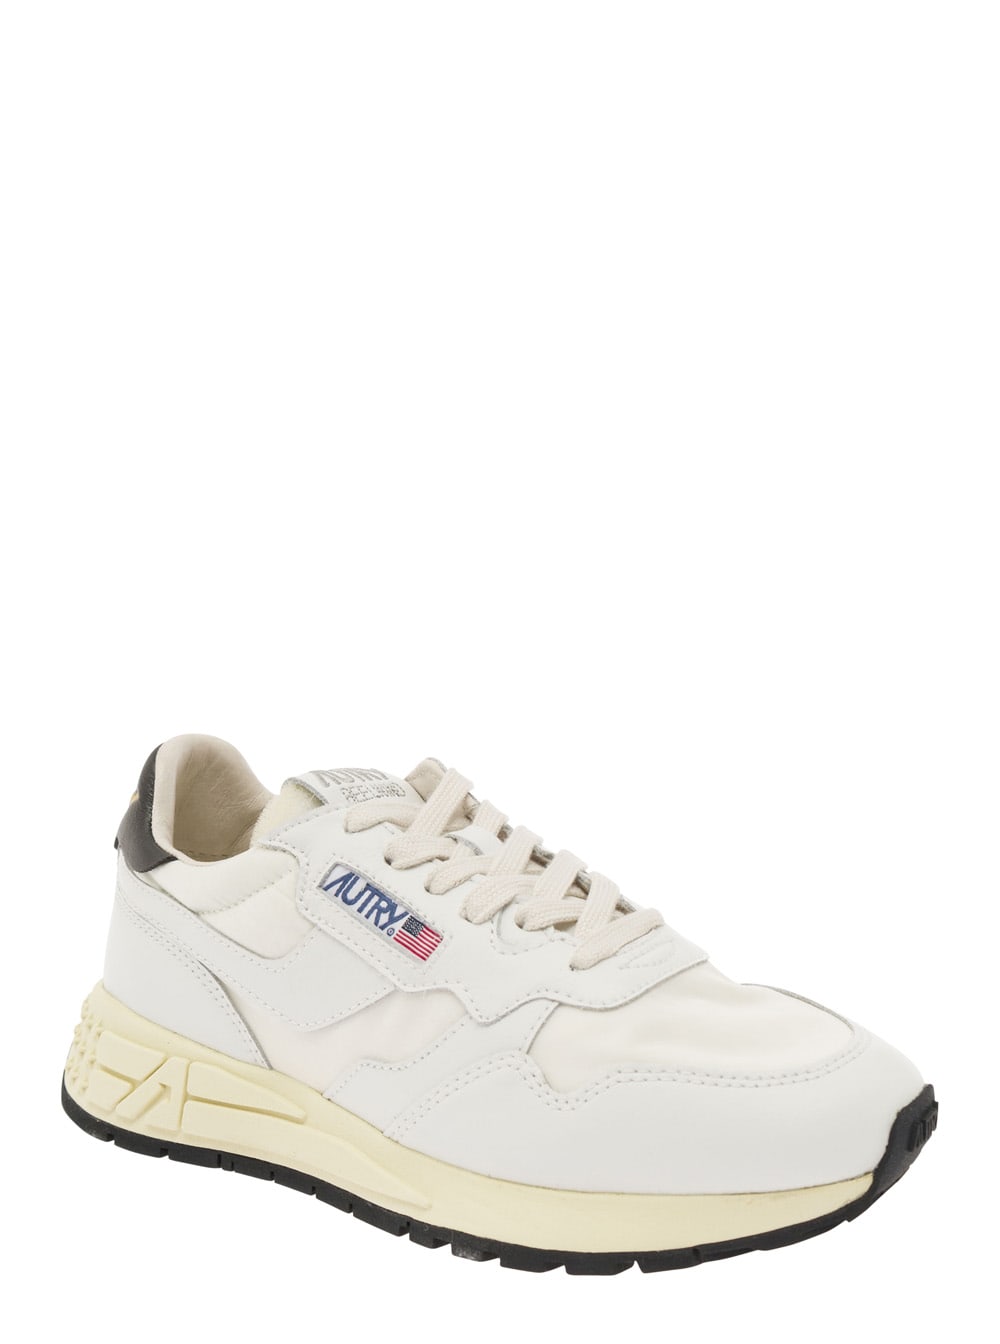 Shop Autry New Runners In White